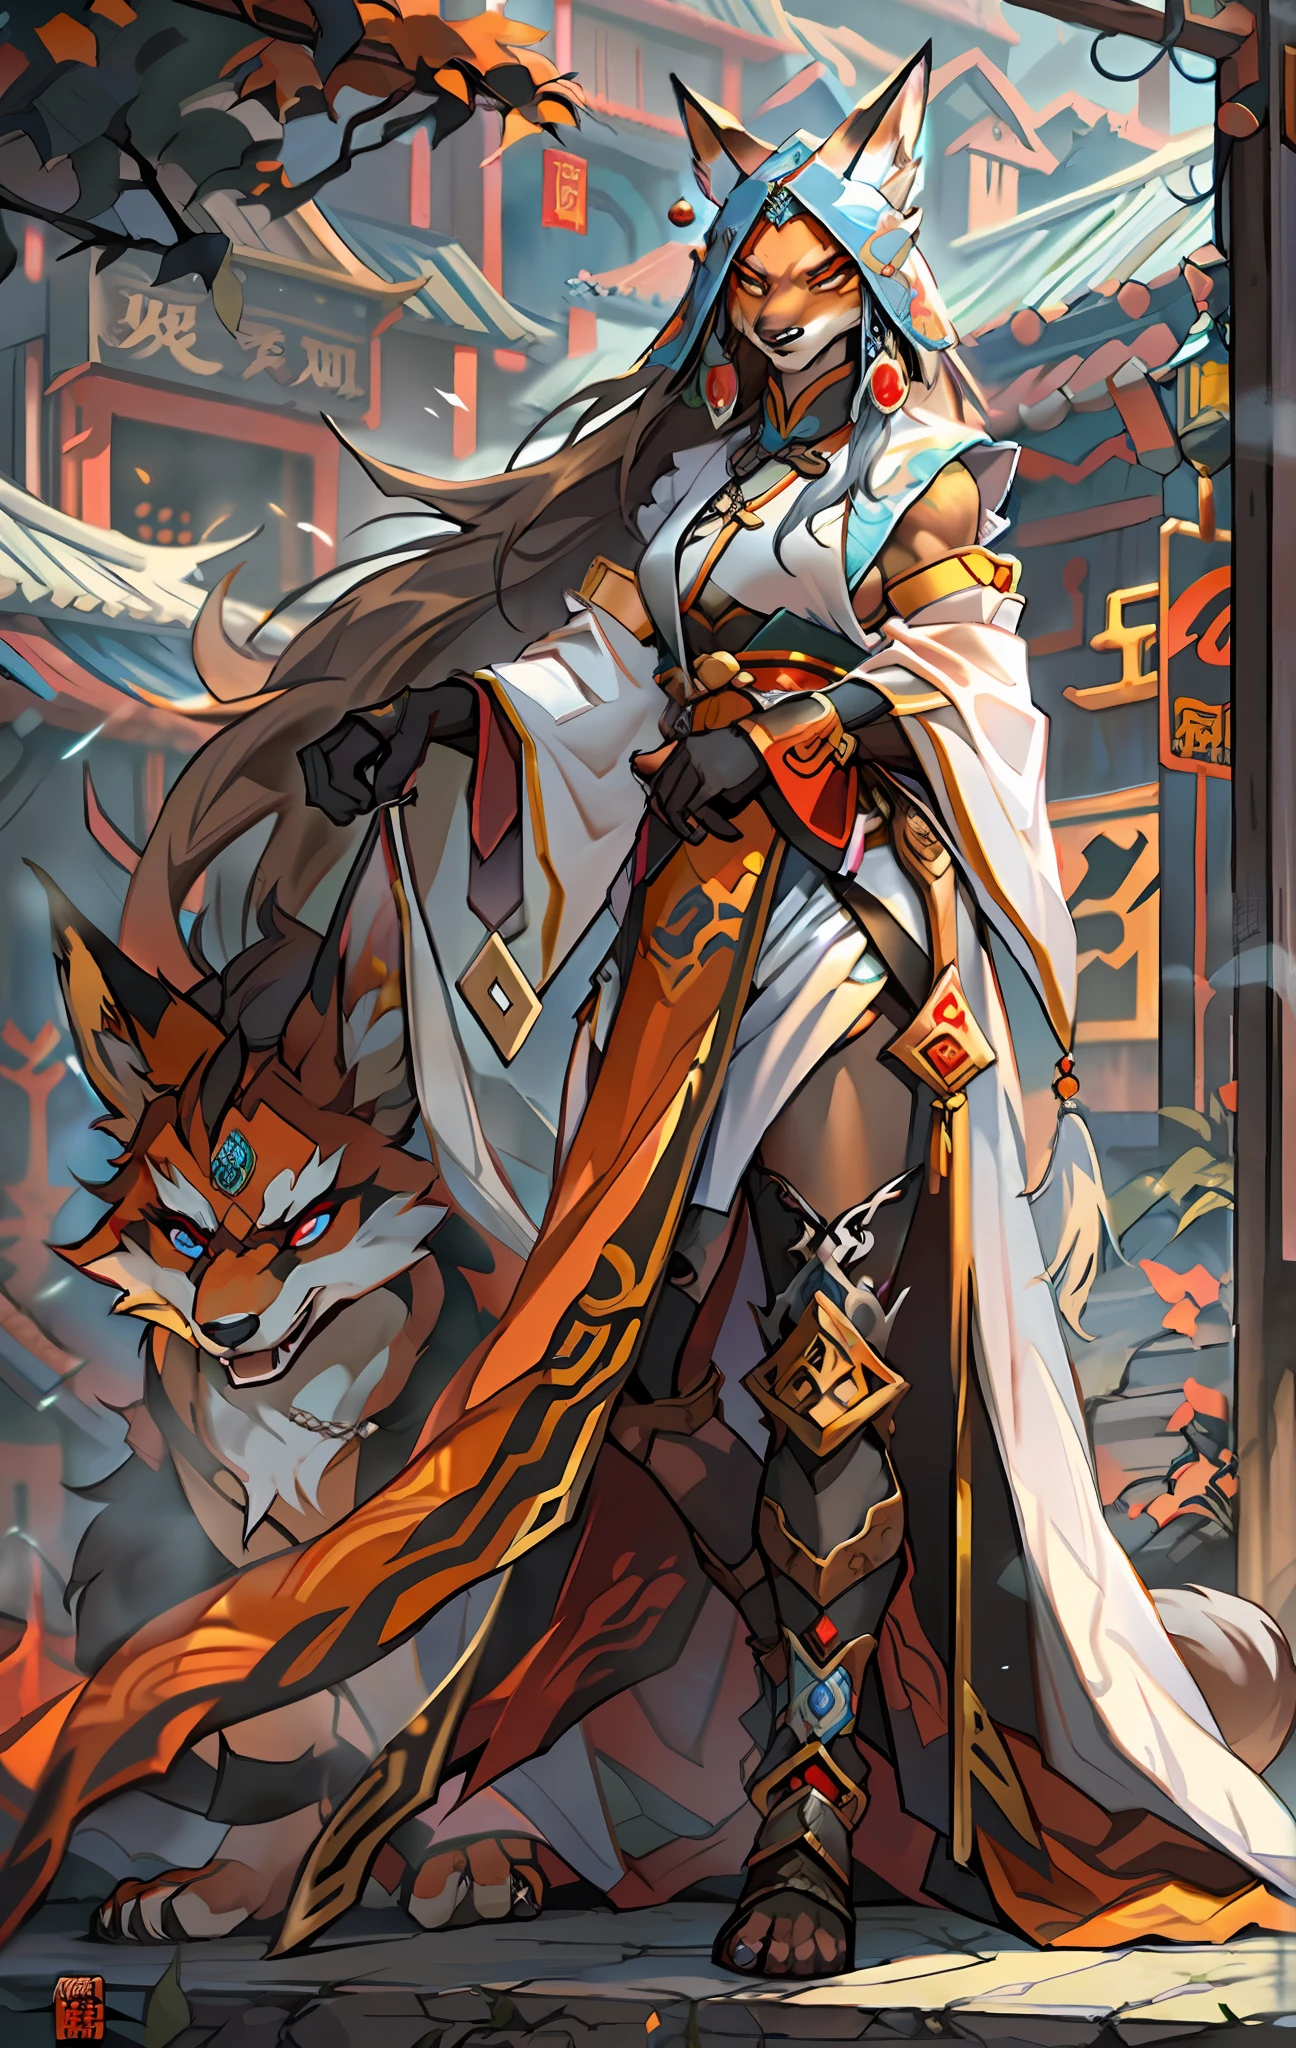 Fox Mage, Full body like，Close-up of the fox mage in the city, Seductive eyes，Fierce，Akira in Chinese mythology, an epic majestical degen trader, bian lian, by Yang J, Chinese Warrior, Anthropomorphic mage fox, Daughter Goku, cgsociety and fenghua zhong, inspired by Li Kan, Epic Mage, Fox warrior woman, White tattered cloak，Armour，Full body standing painting，Fantasy setting, character concept, character art, Character portrait, Cartoon, Best quality, Best resolution, 4K, Vivid colors, Vivid, High detail, best detail, confident pose, extrovert, look from down,